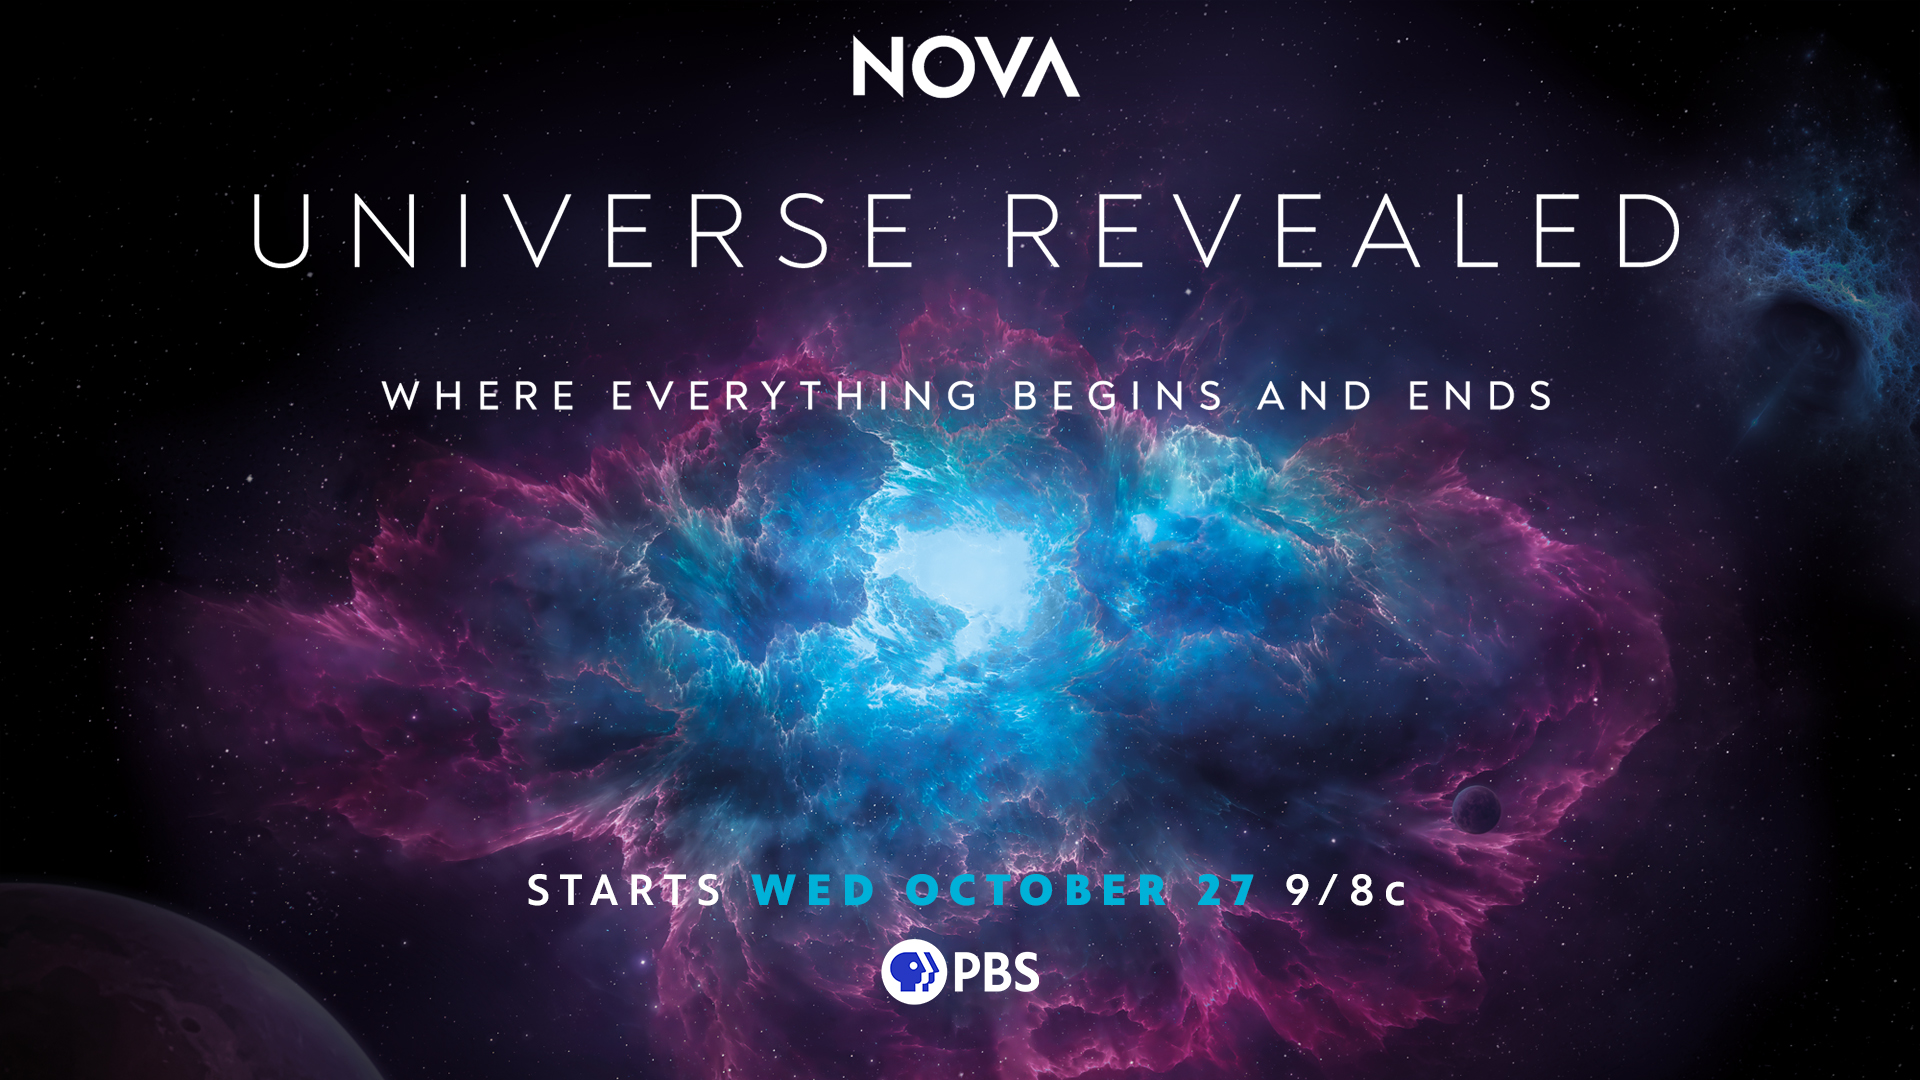 PBS NOVA science series 'Universe Revealed' will explore the